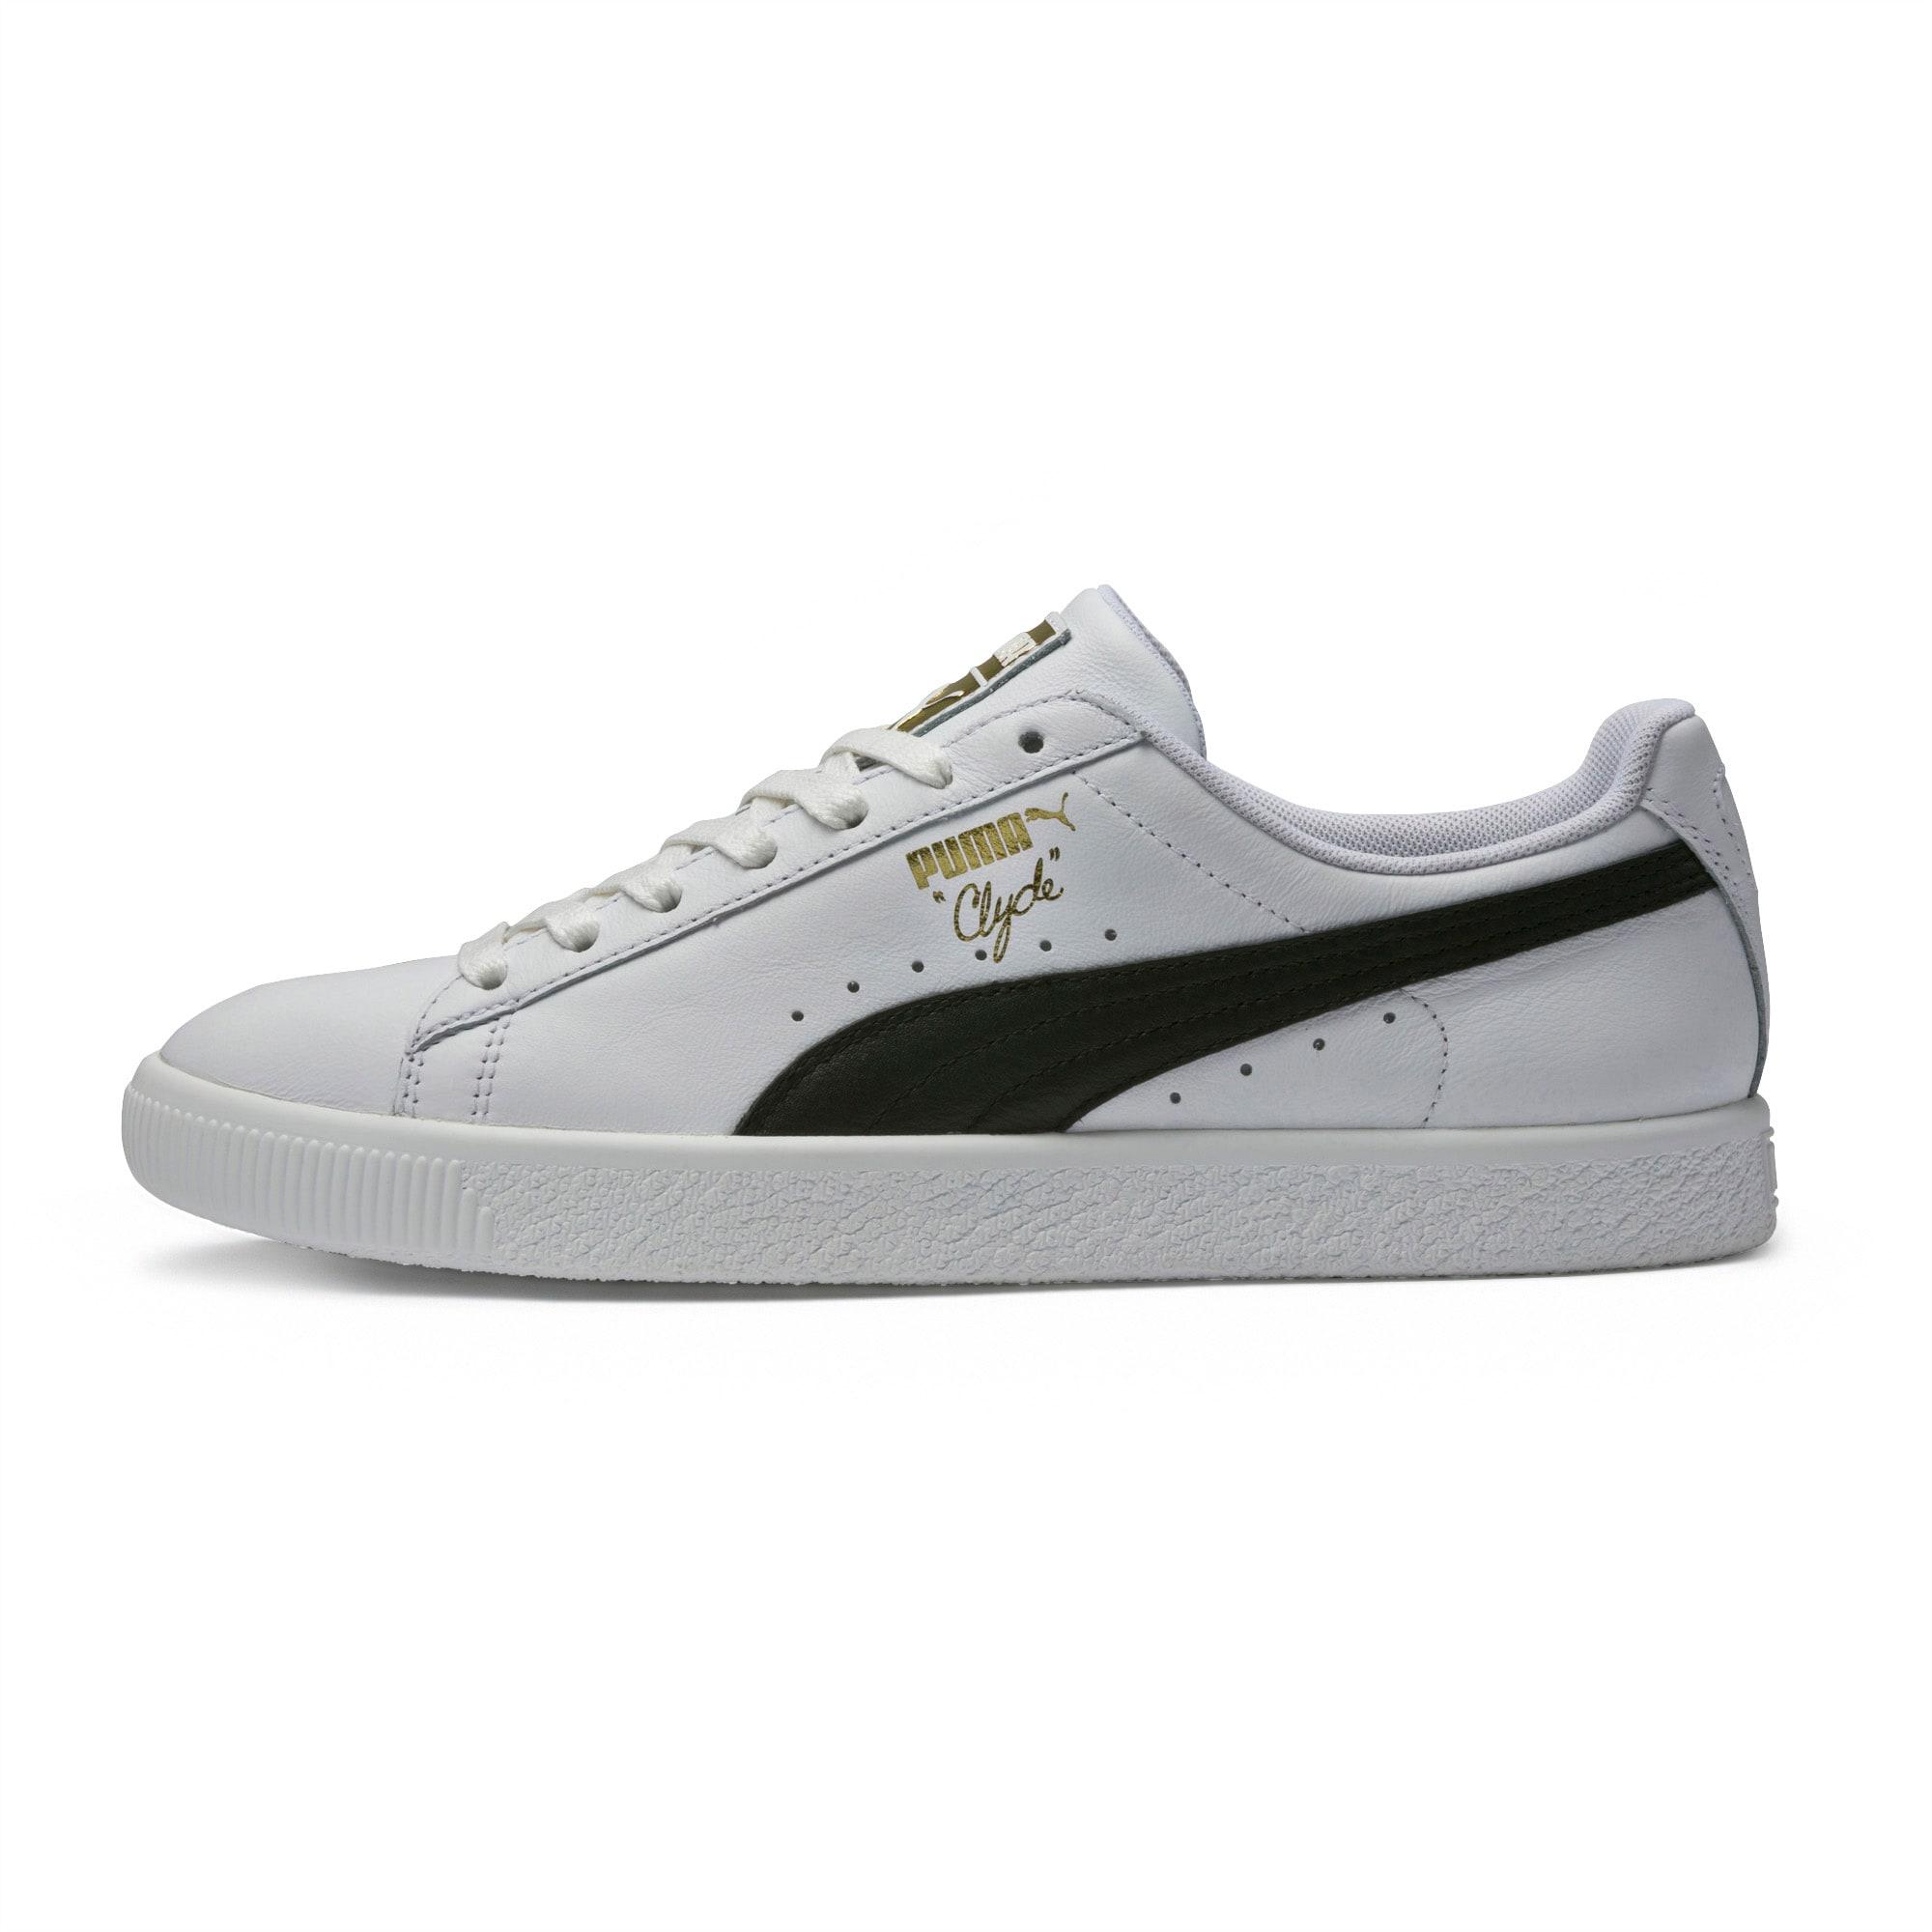 PUMA Clyde Core Foil Men's Sneakers in 01 (White) for Men - Save 21% - Lyst